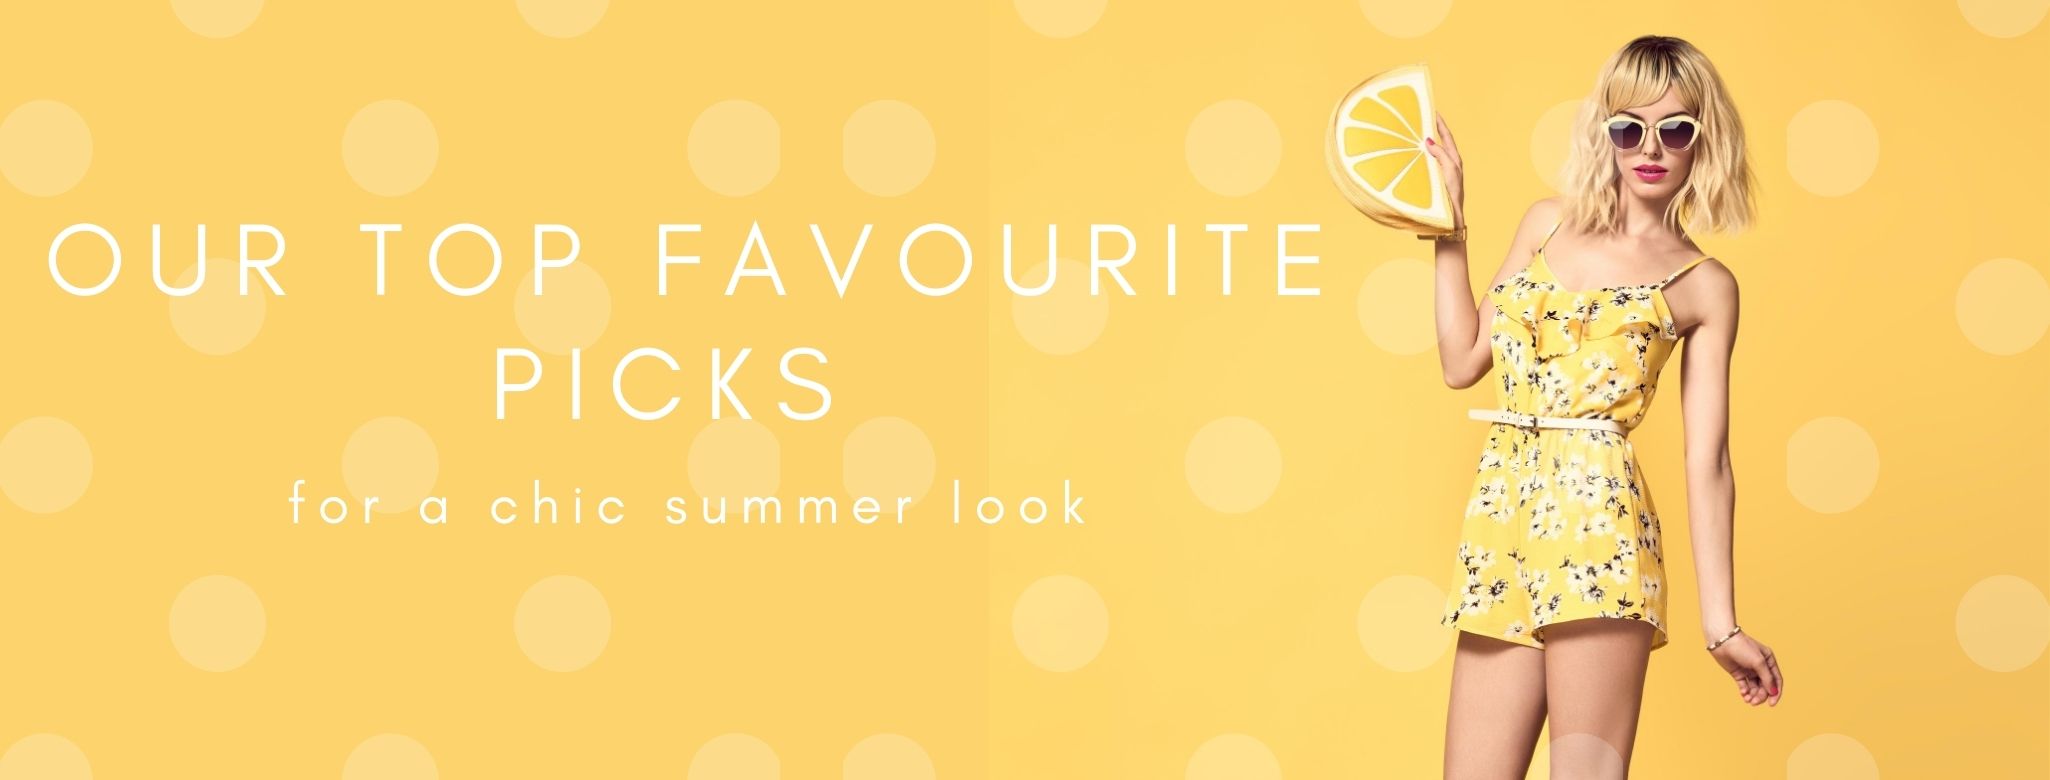 Top picks for chic summer look